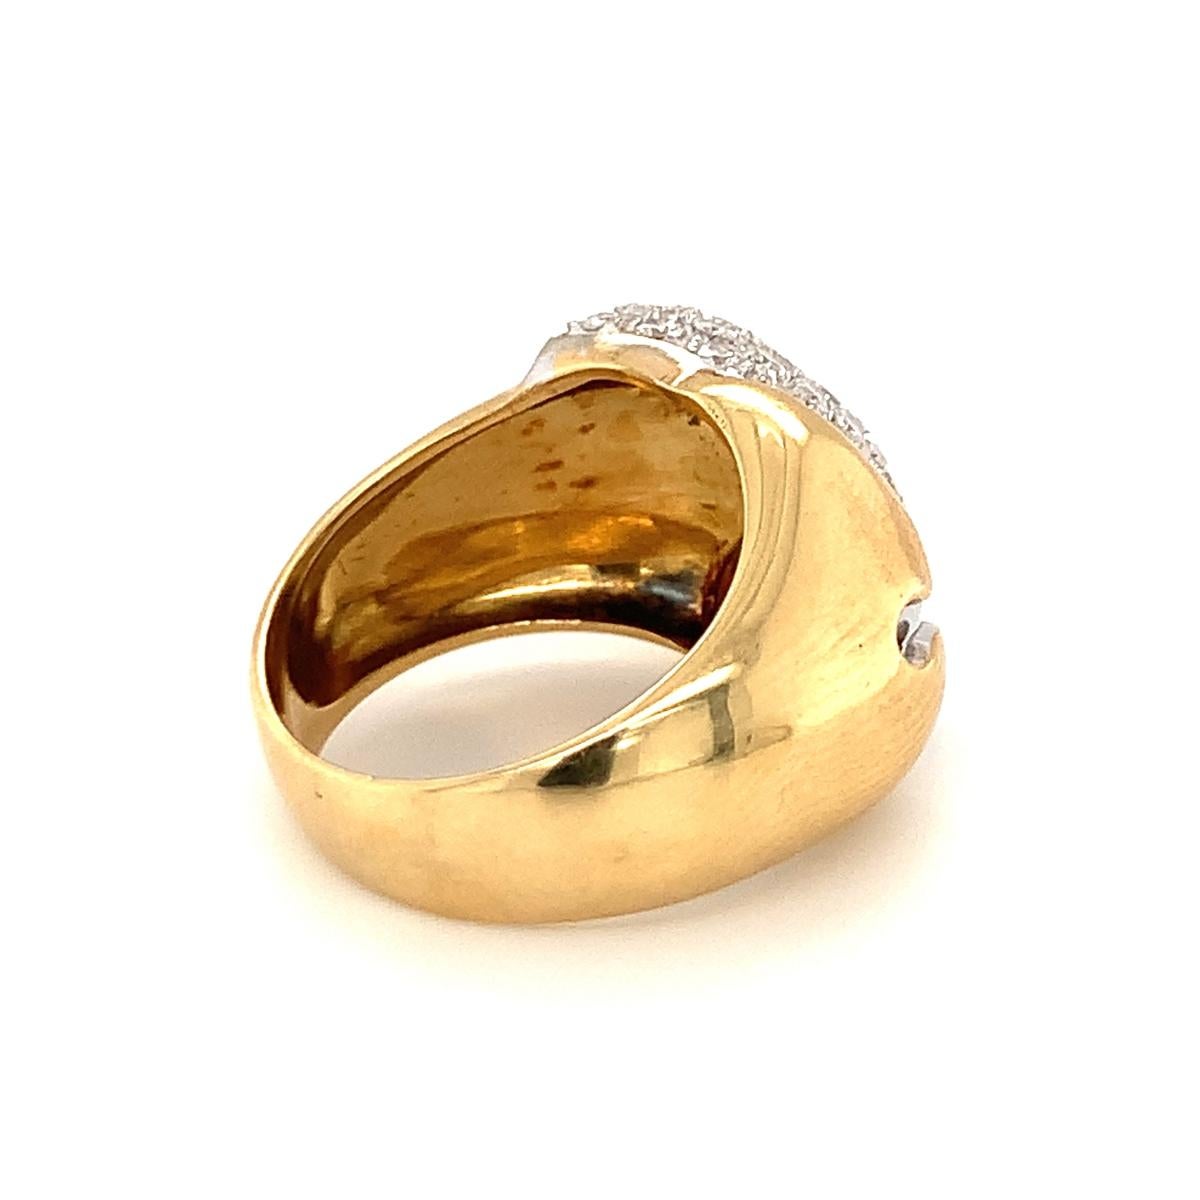 Diamond Pave Gold Ring, circa 1970s For Sale 1